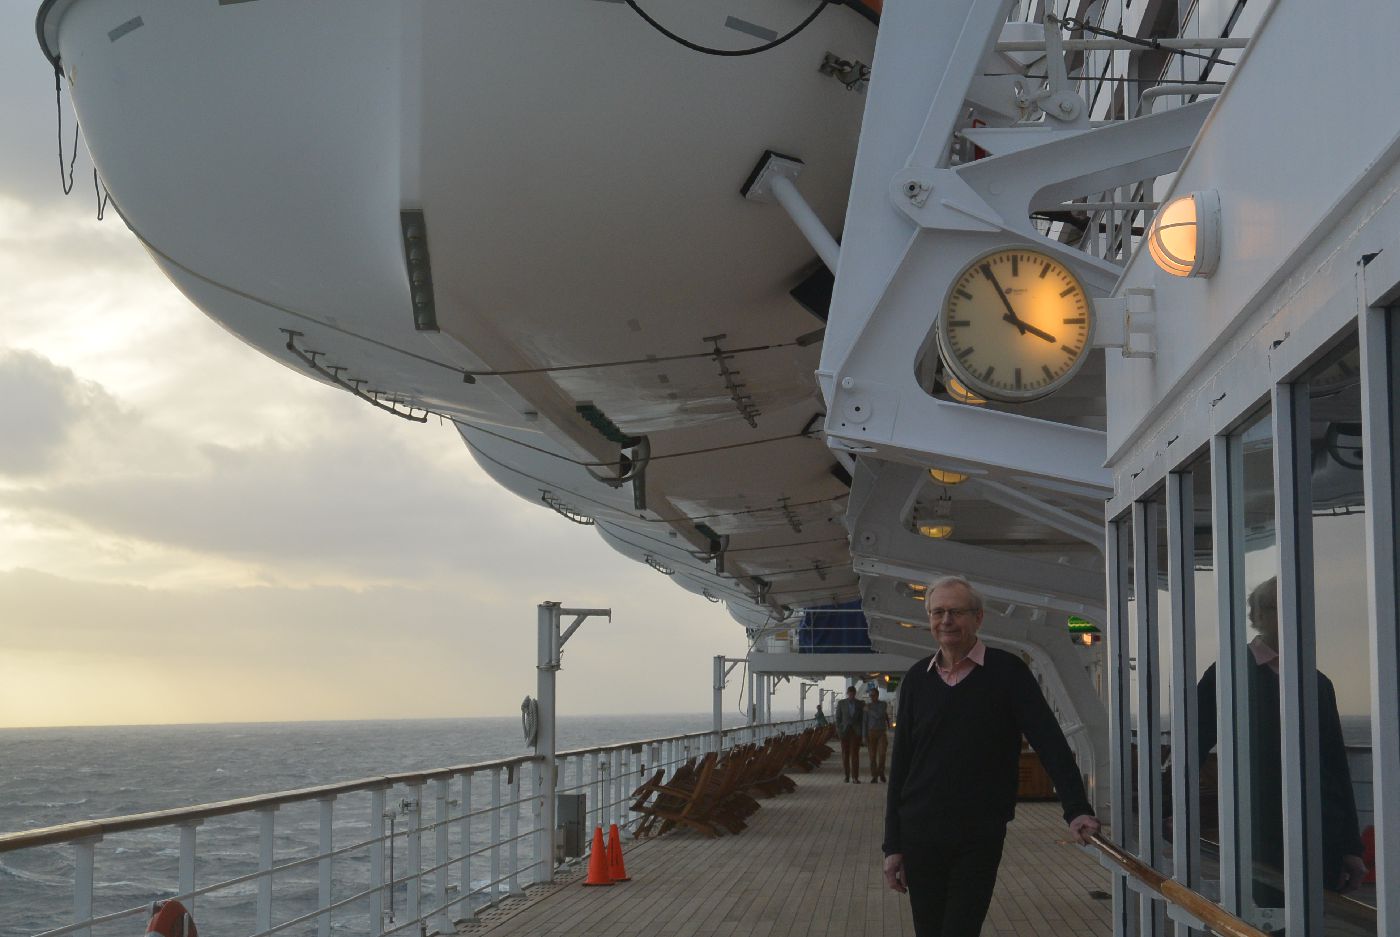 Errol Lincoln Uys on Atlantic Crosssing, Queen Mary 2, January 2015.